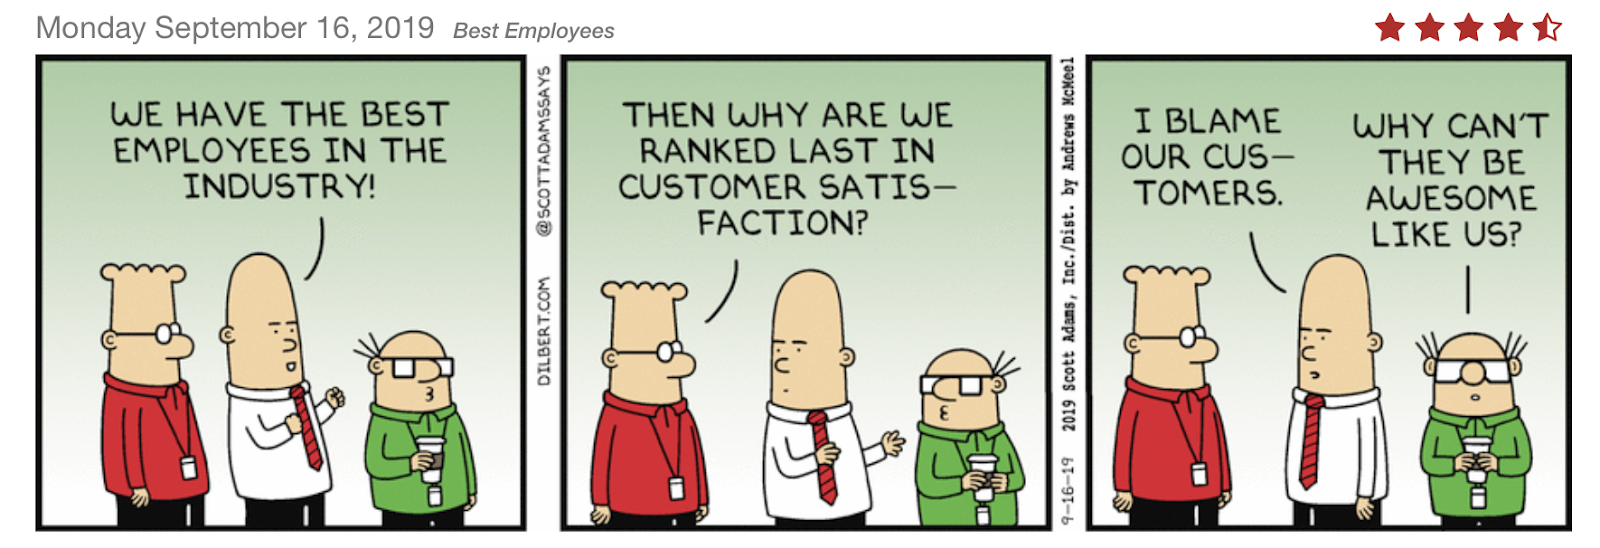 Mse Creative Consulting Blog Scott Adams Must Have Been Visiting Delta Airlines Last Week